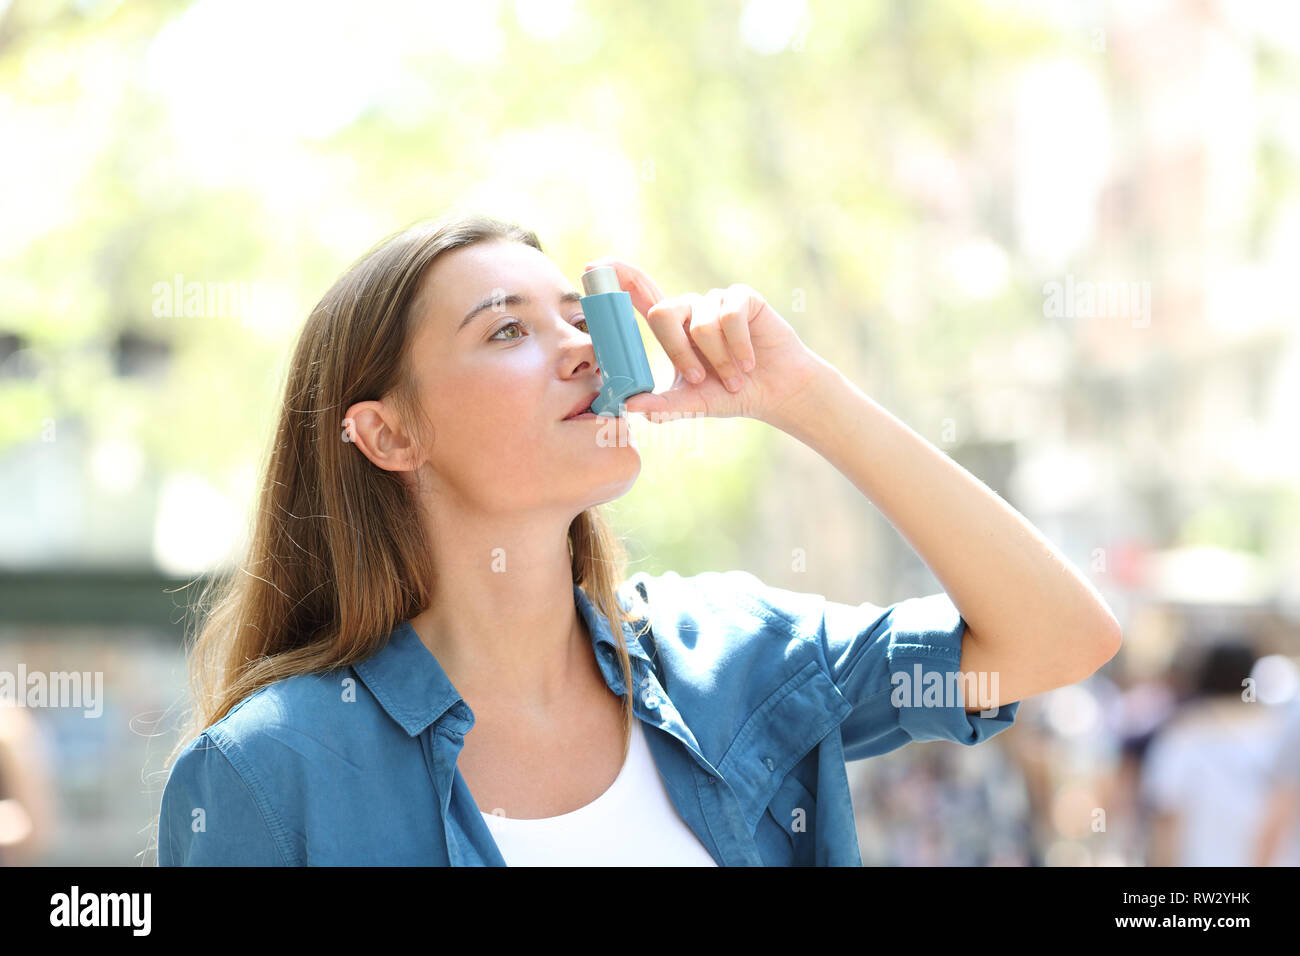 Asthmatic woman having an attack using asthma inhaler standing in the street Stock Photo